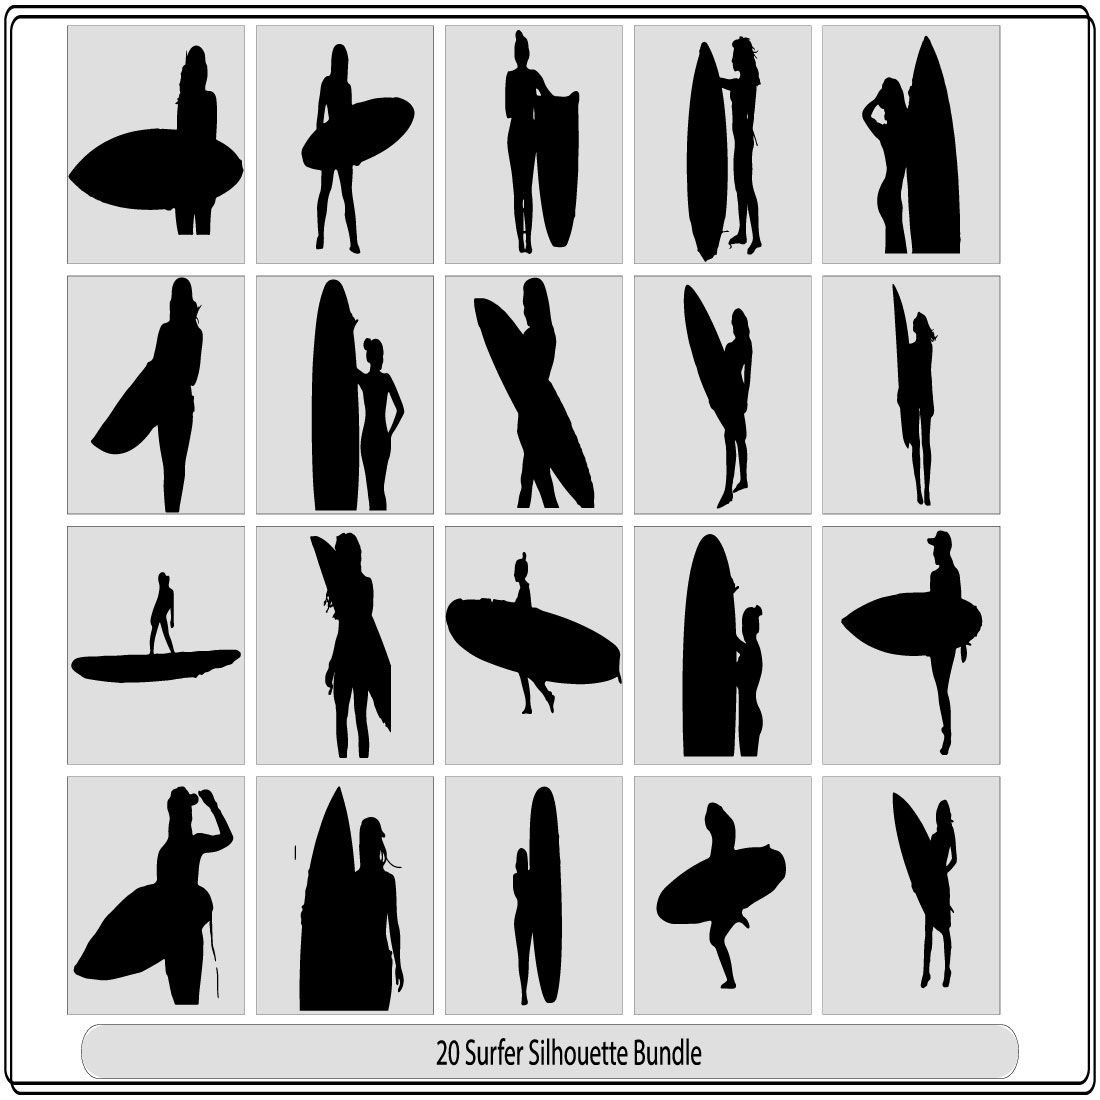 A set of high quality detailed silhouettes of a surfer surfing the waves on his surfboard preview image.